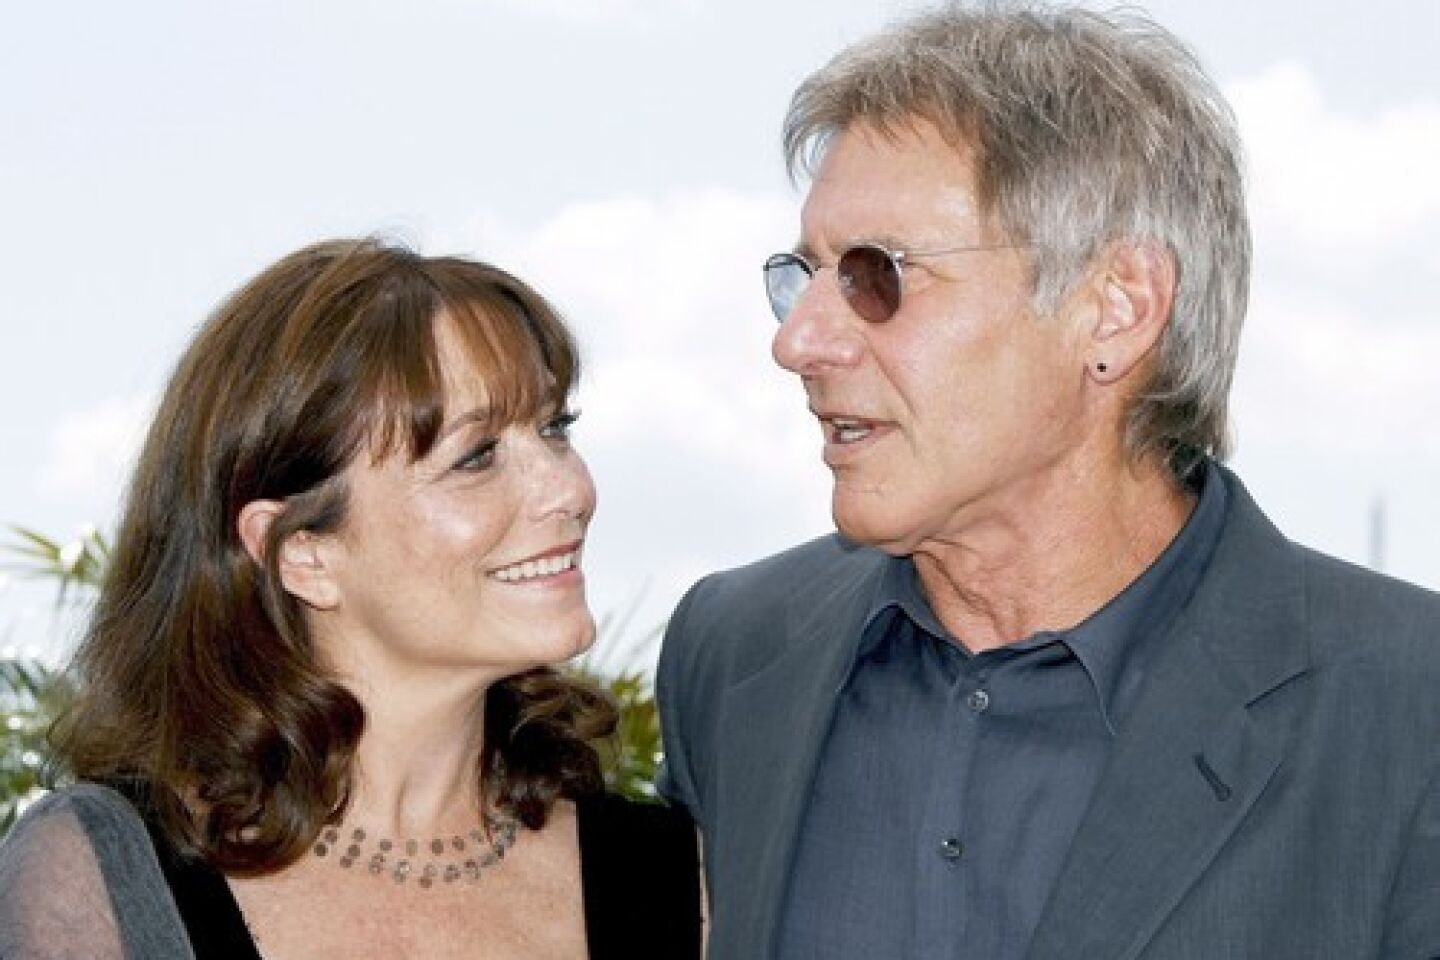 Karen Allen and Harrison Ford at the Cannes premiere of "Indiana Jones and the Kingdom of the Crystal Skull."